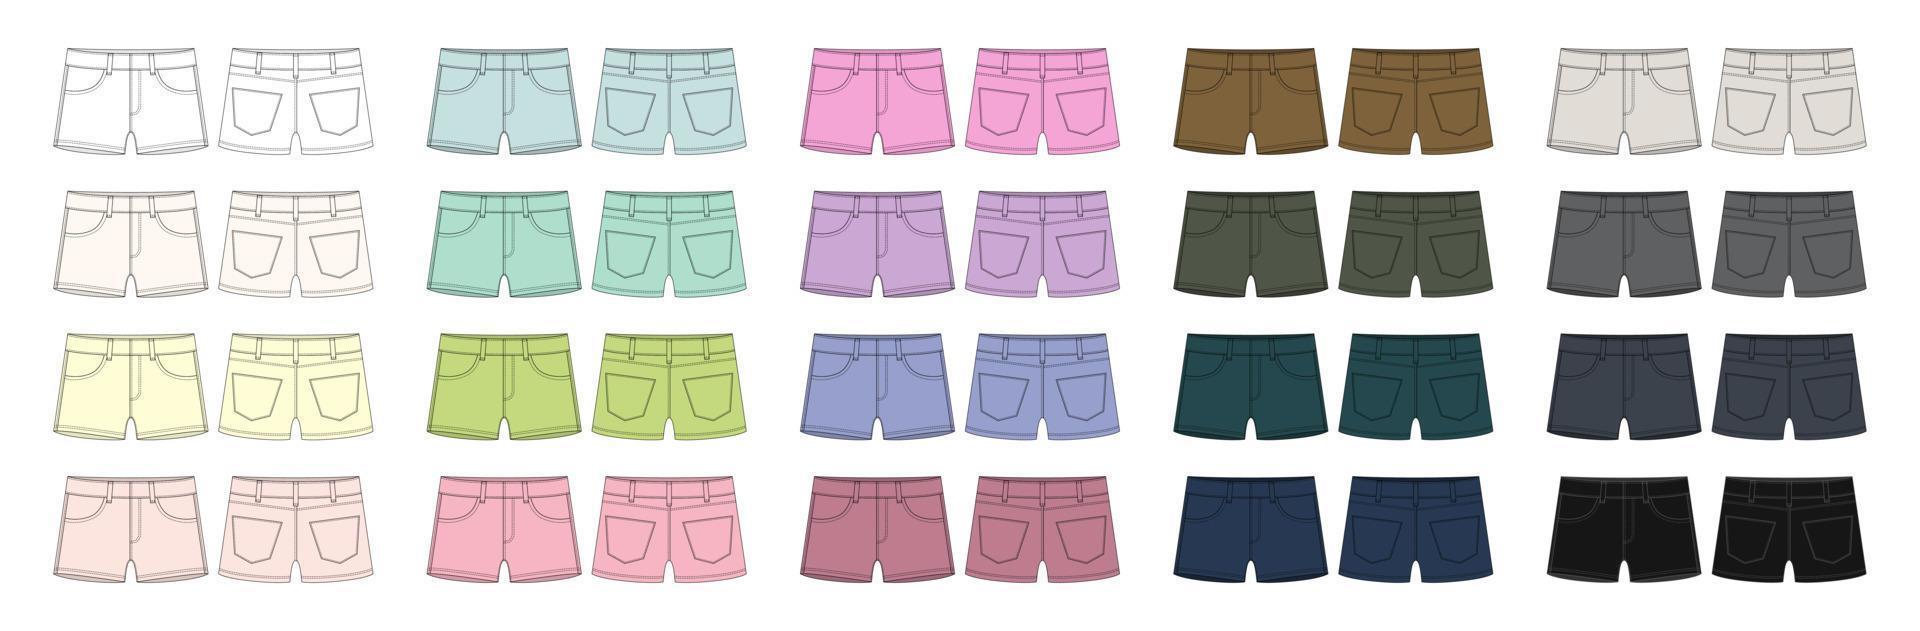 Set of denim short with pockets technical sketch. Kids jeans shorts design template collection. Diffirent colors. vector